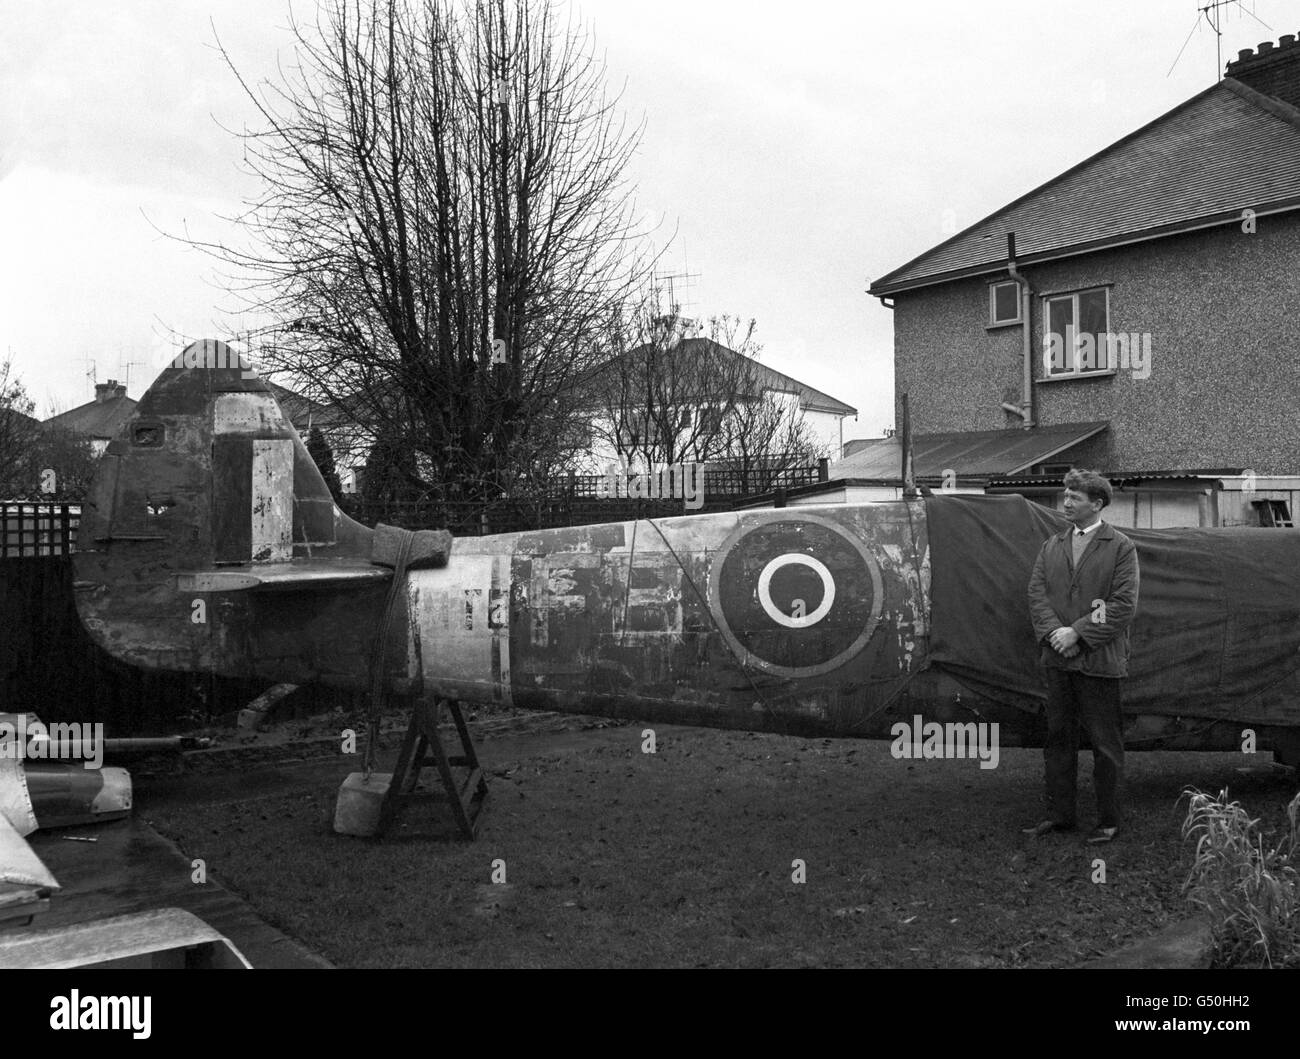 Mr. William Francis with a World War Two Spitfire in the garden of his Essex home. Having worked with them during the war and growing a sentimental attachment to them, he decided to buy this damaged one from RAF Henlow to renovate Stock Photo